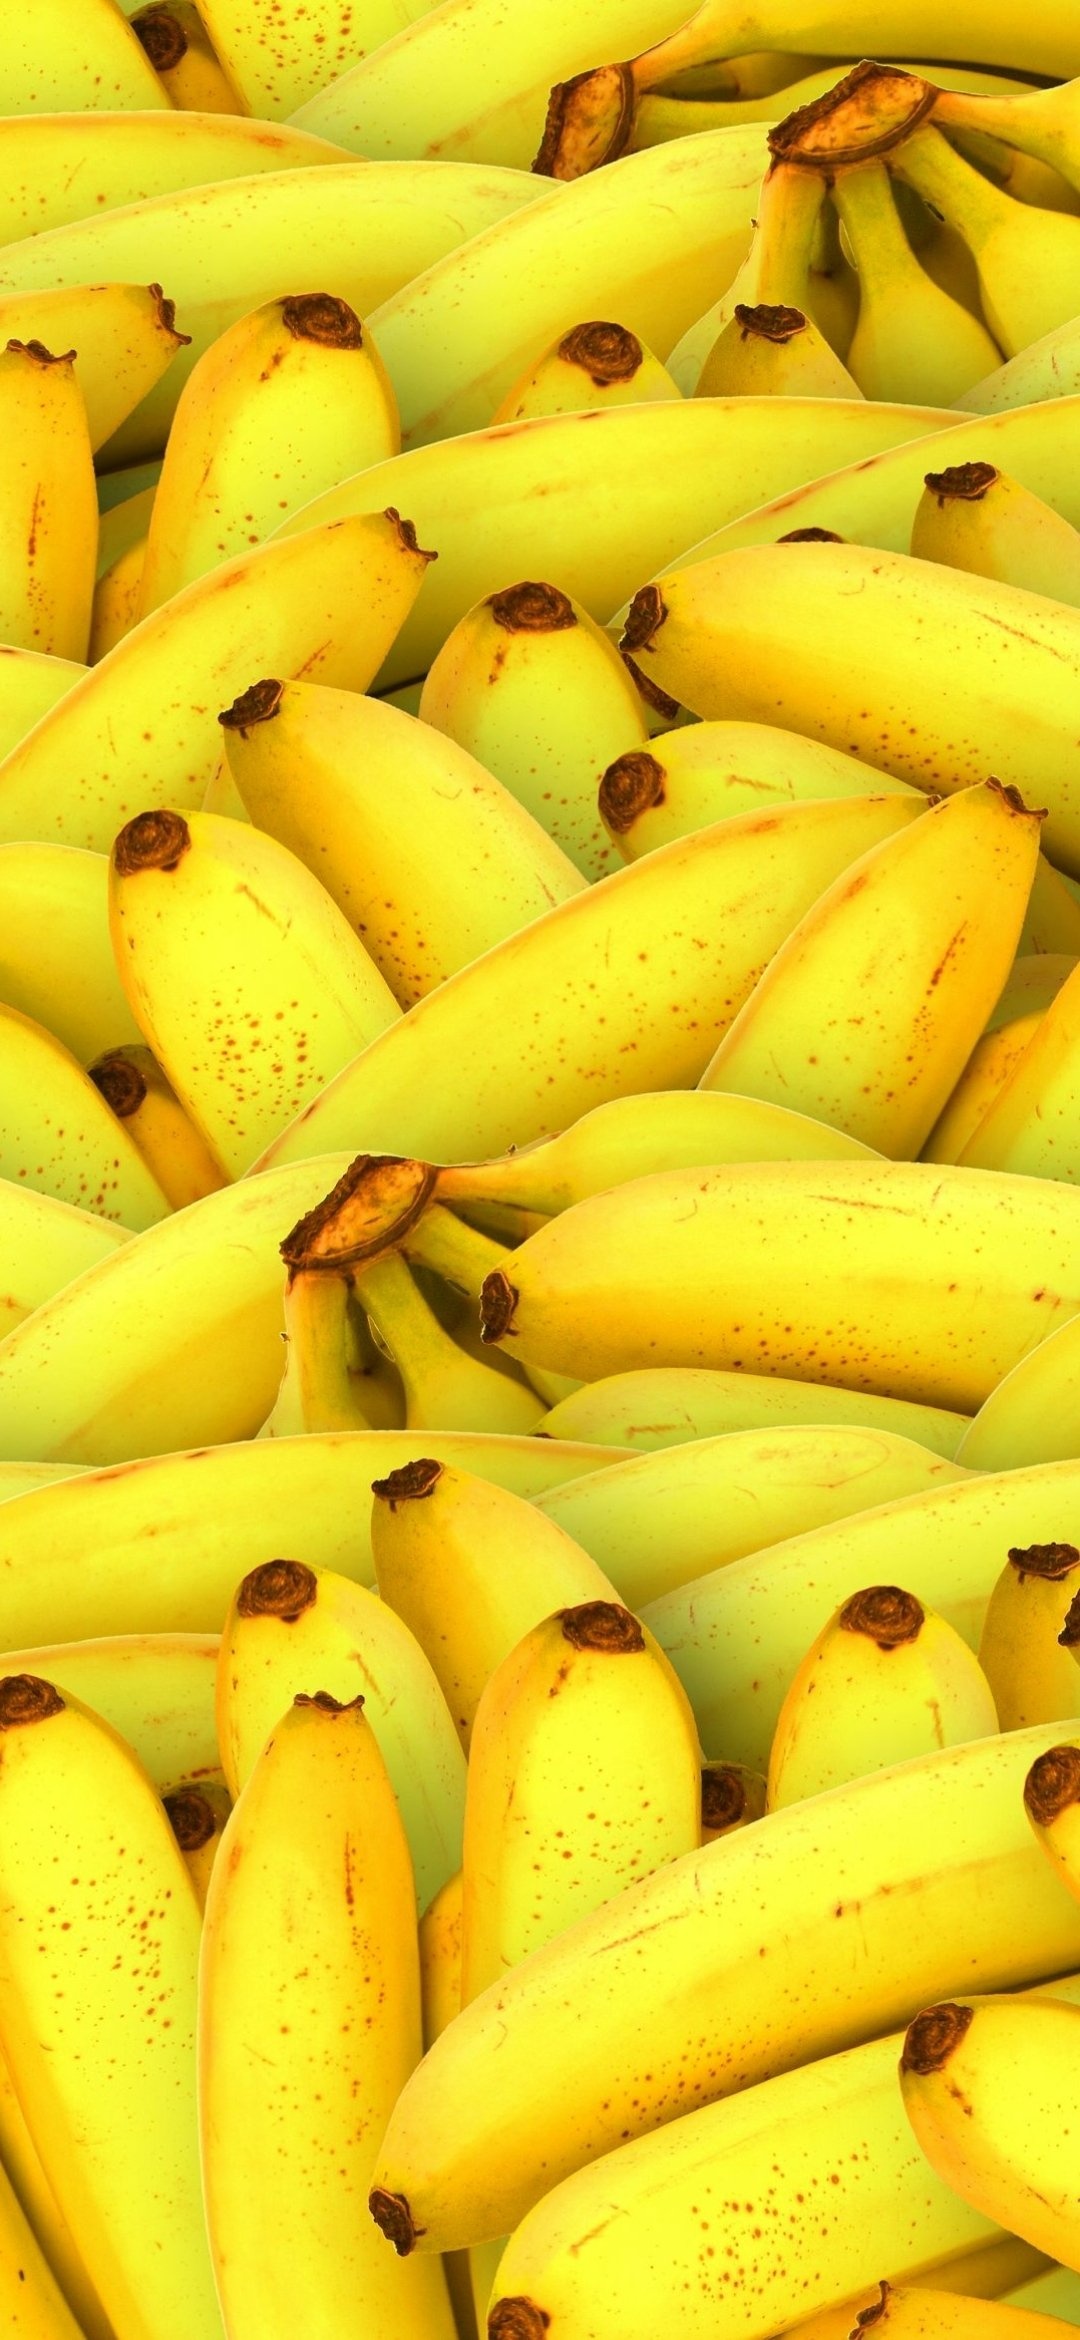 Banana feast, Culinary delight, Nutritious goodness, Finger-licking satisfaction, 1080x2340 HD Handy